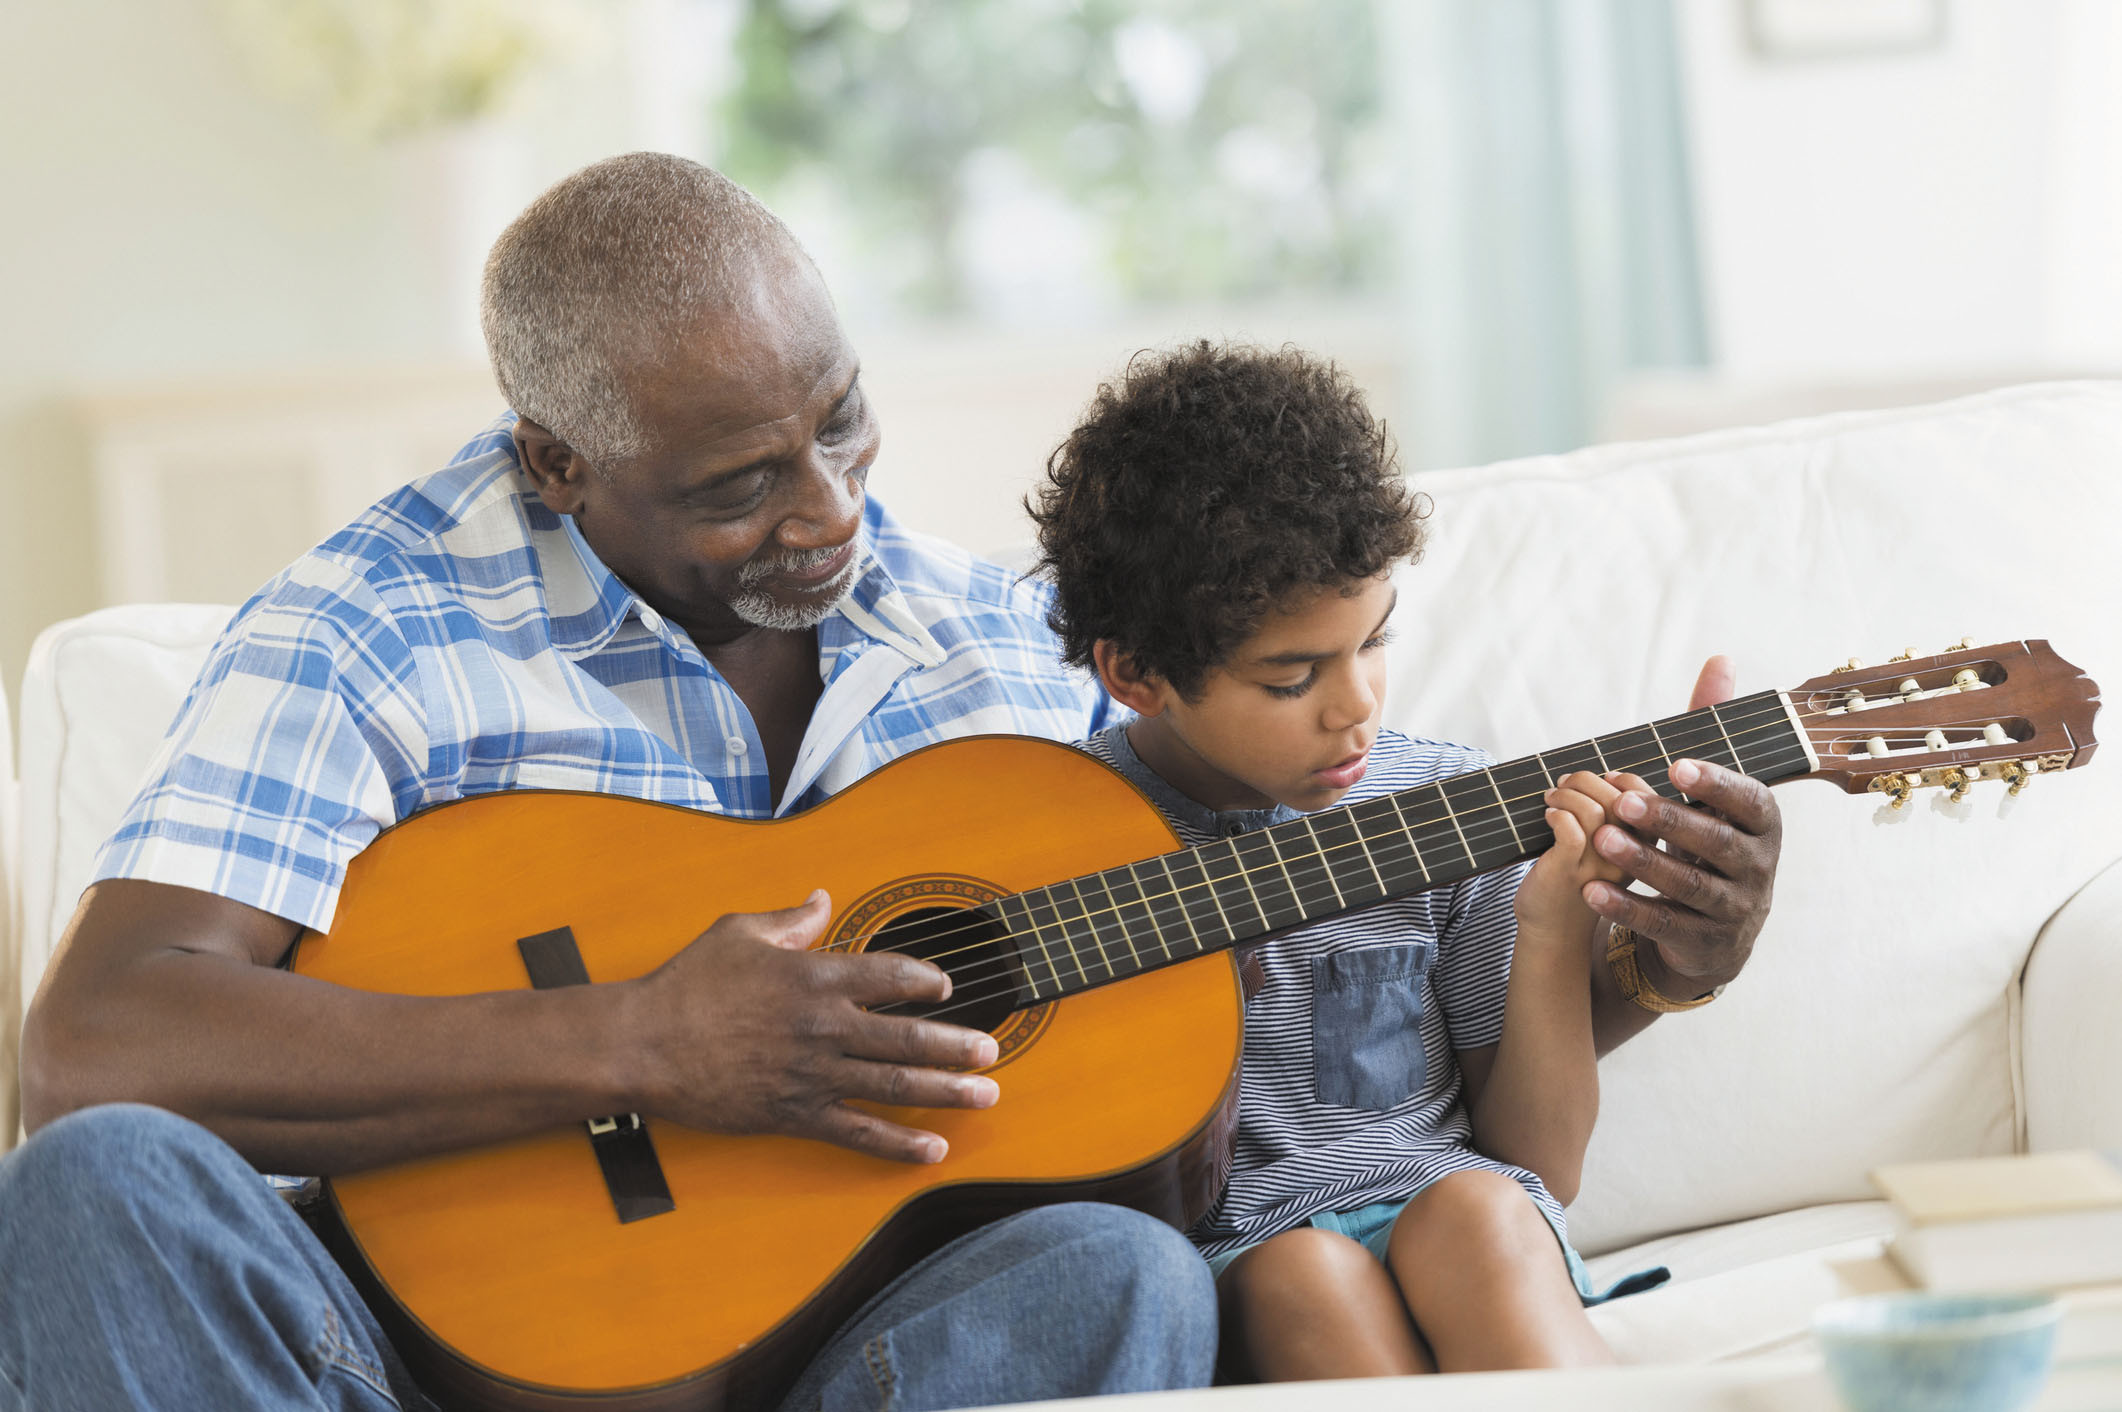 photo of a senior man showing his grandson how to play guitar